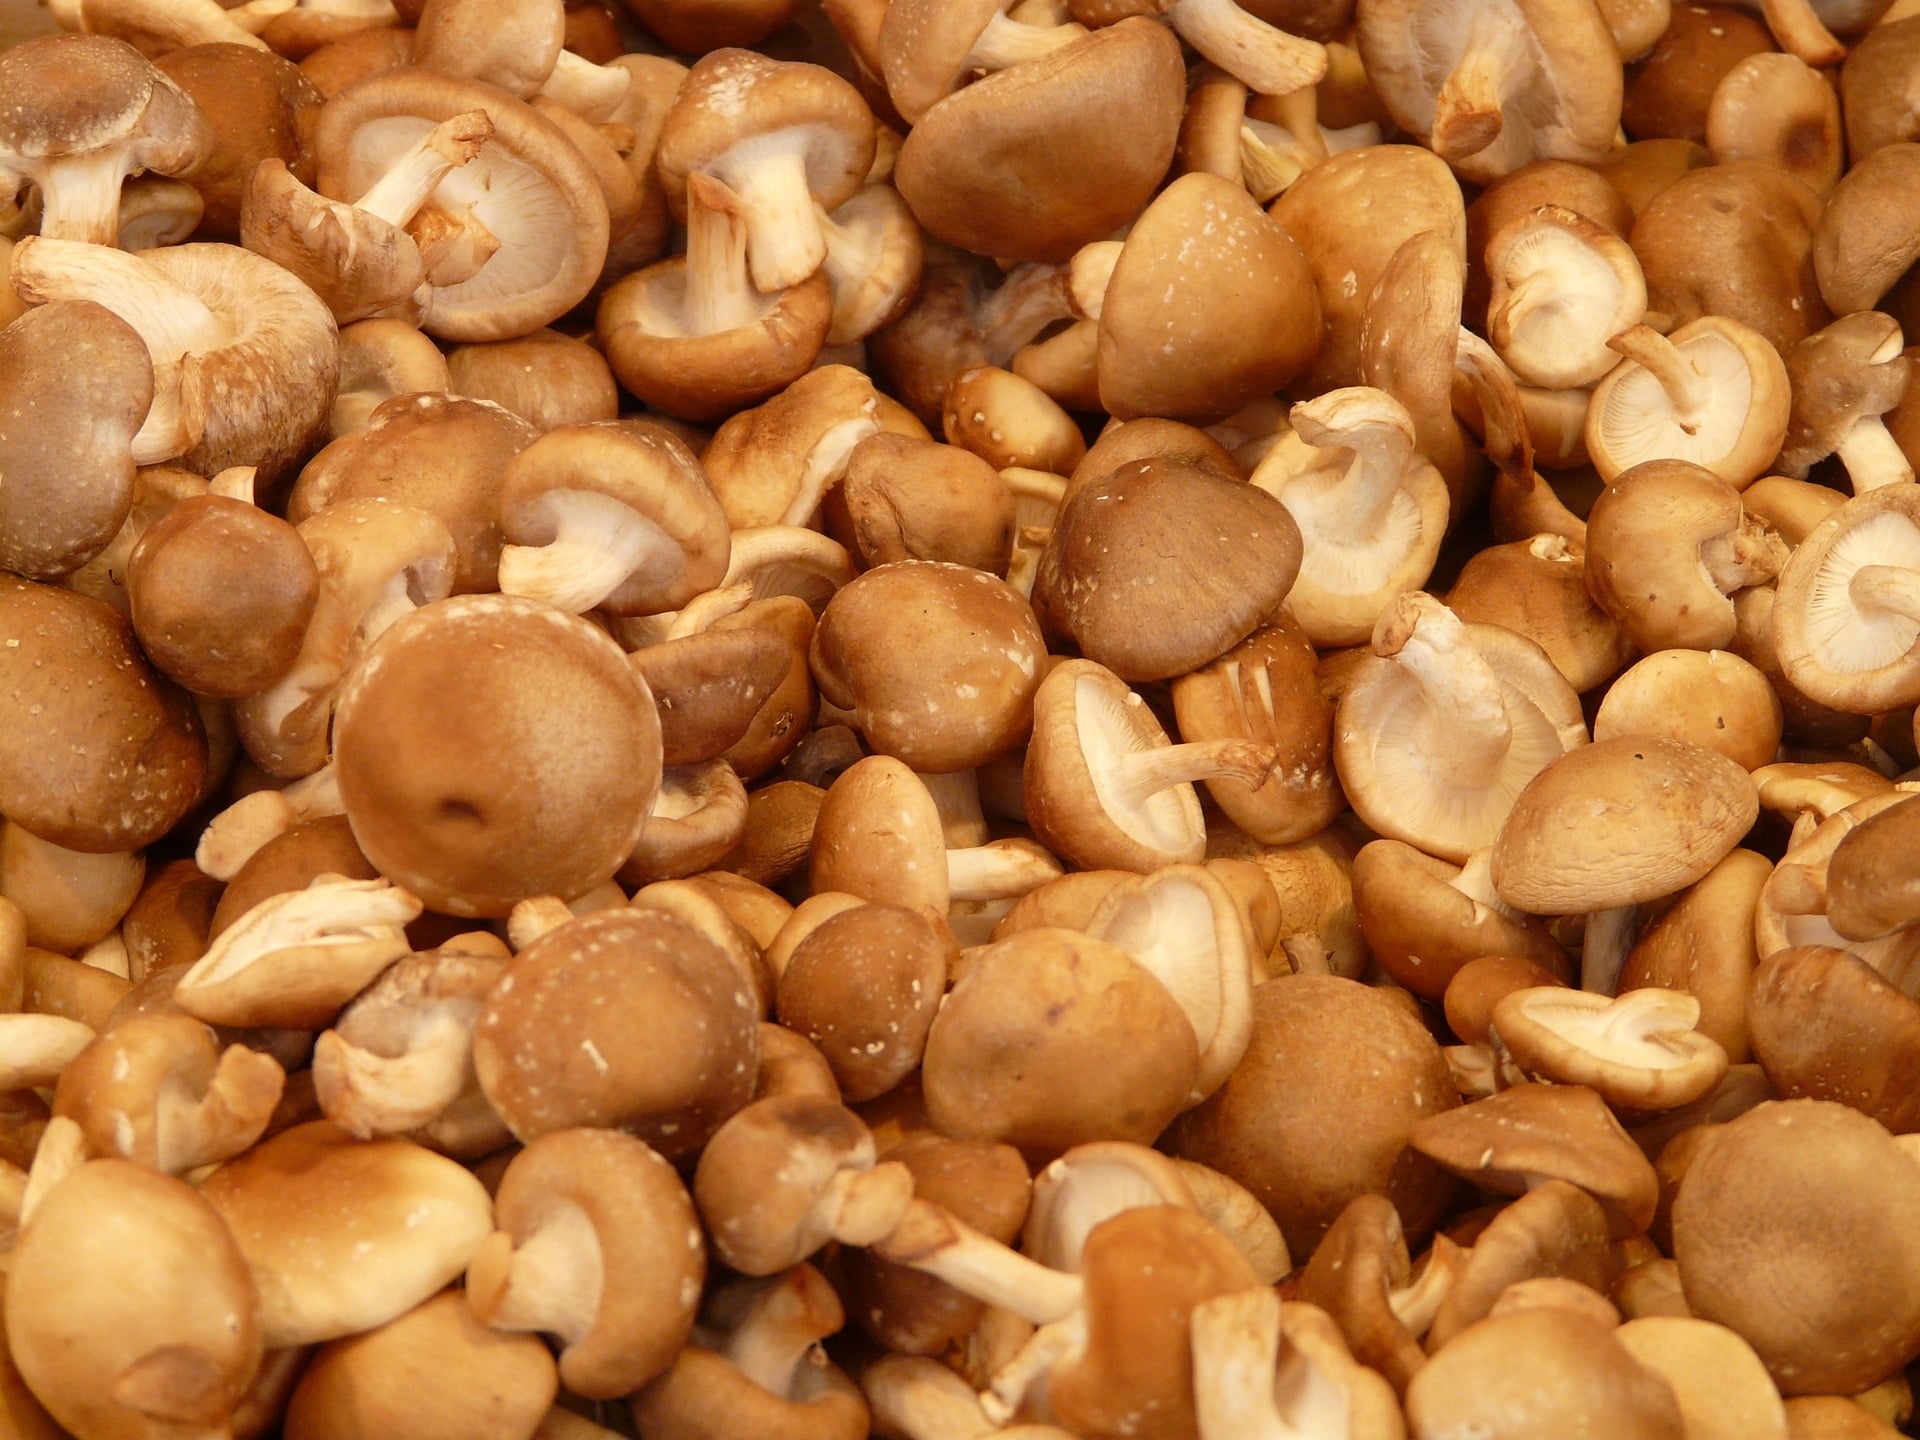 Mushrooms: Nutrition, Benefits, Side Effects, More